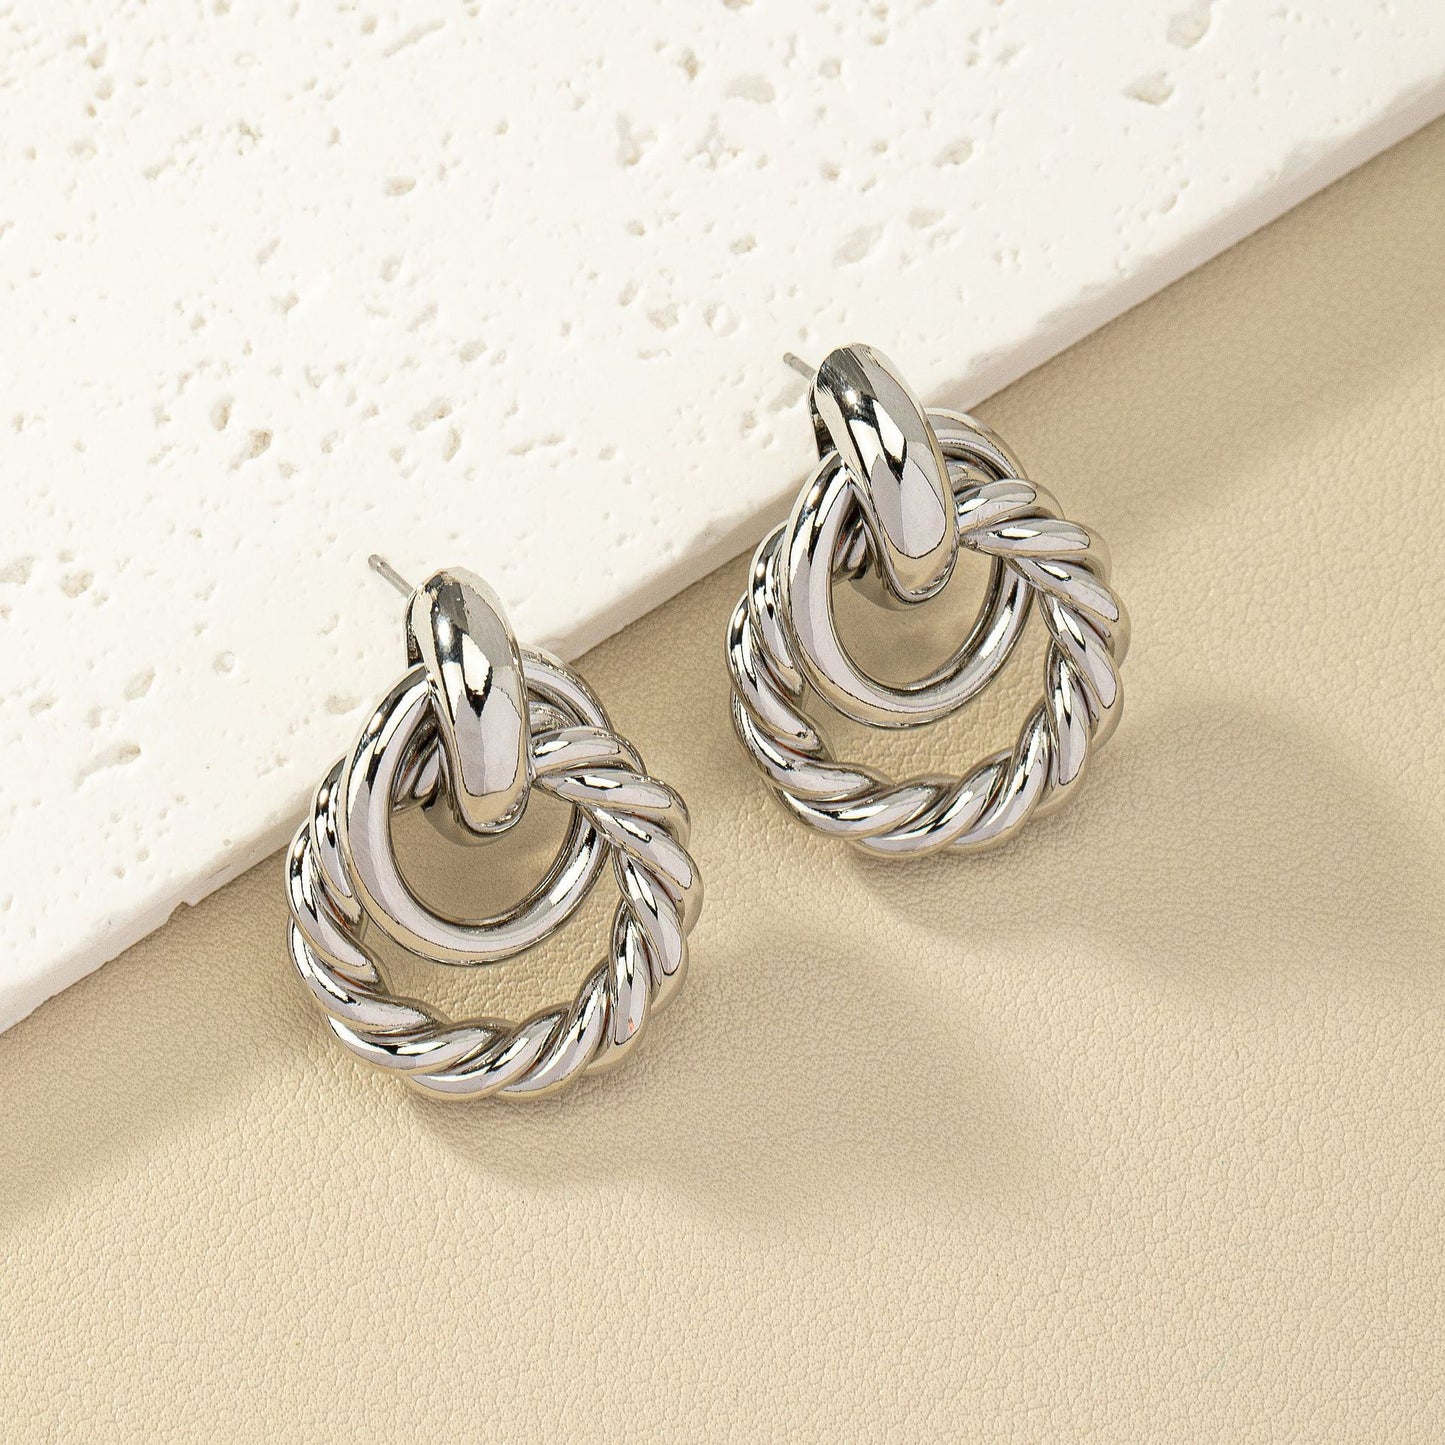 Chic Vienna Verve Metal Earrings with Unique Winding Design